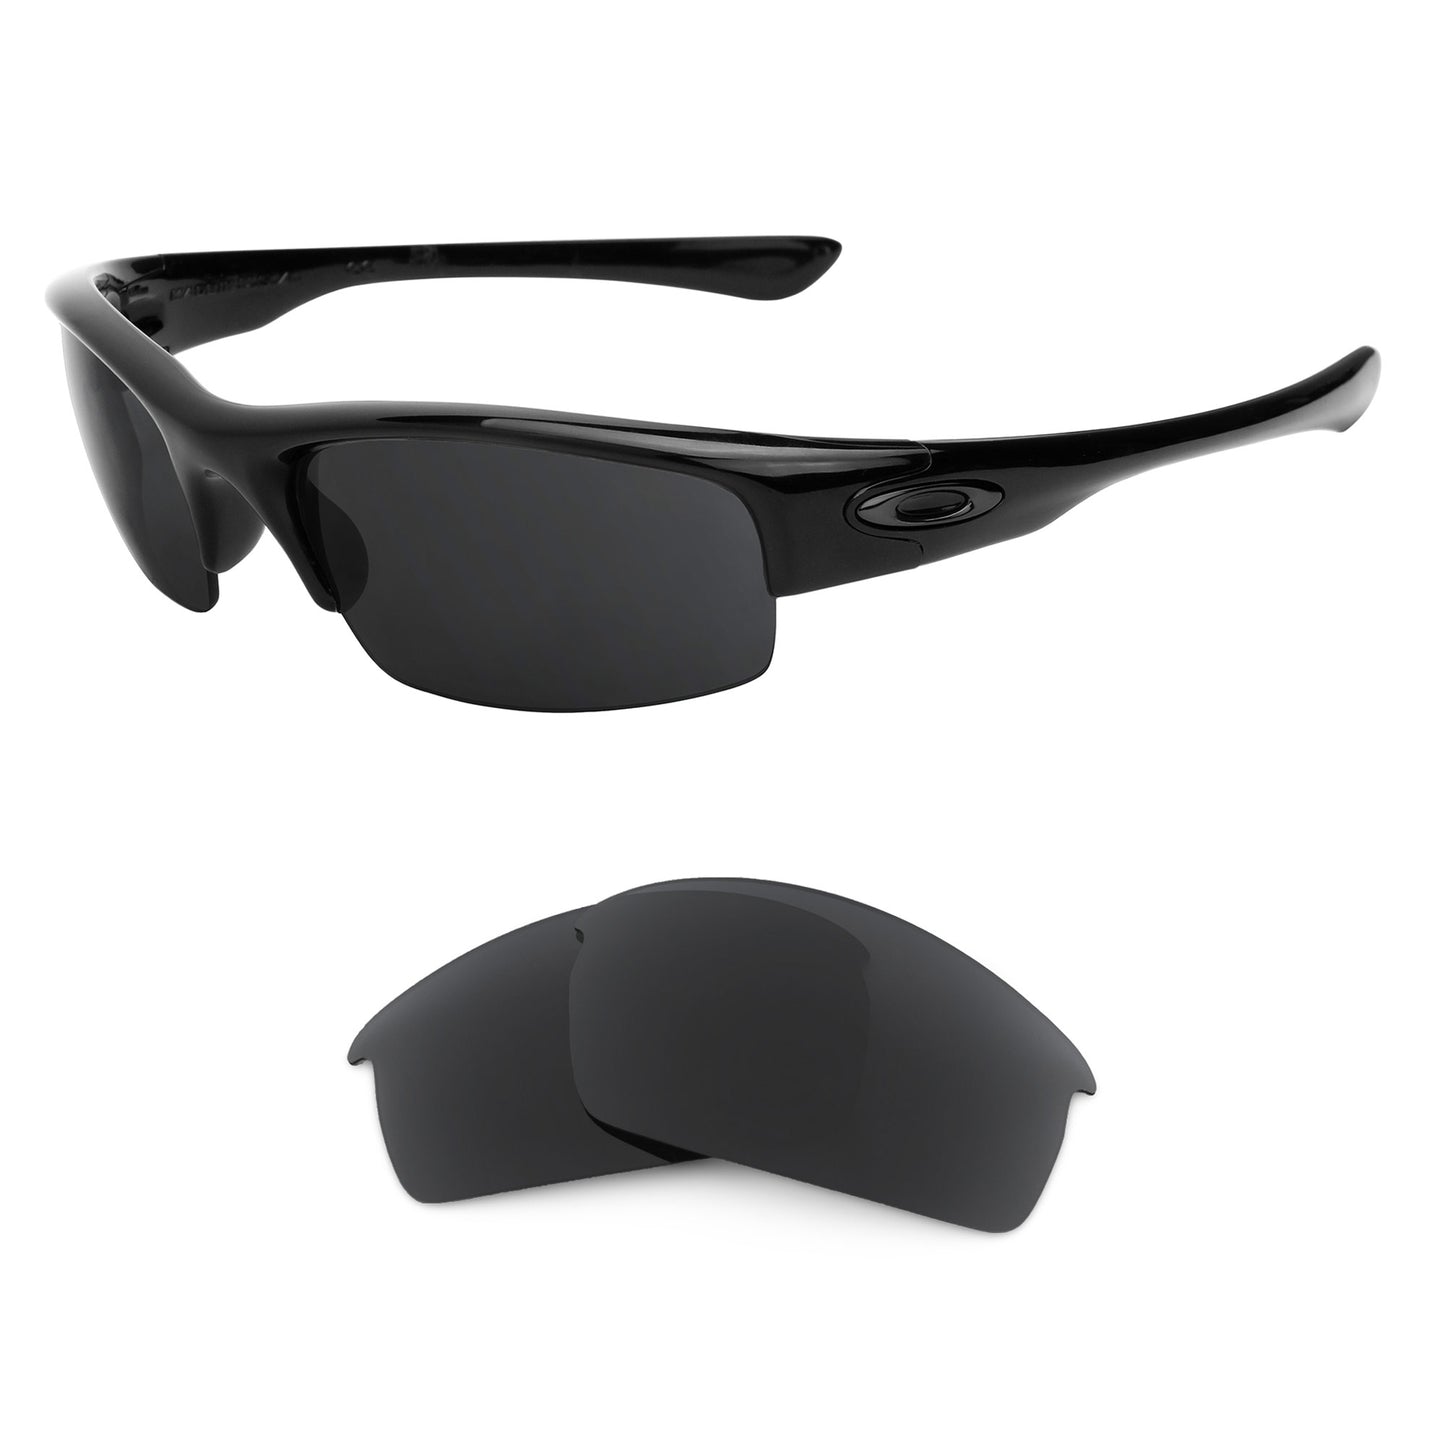 Oakley O Rokr Pro sunglasses with replacement lenses